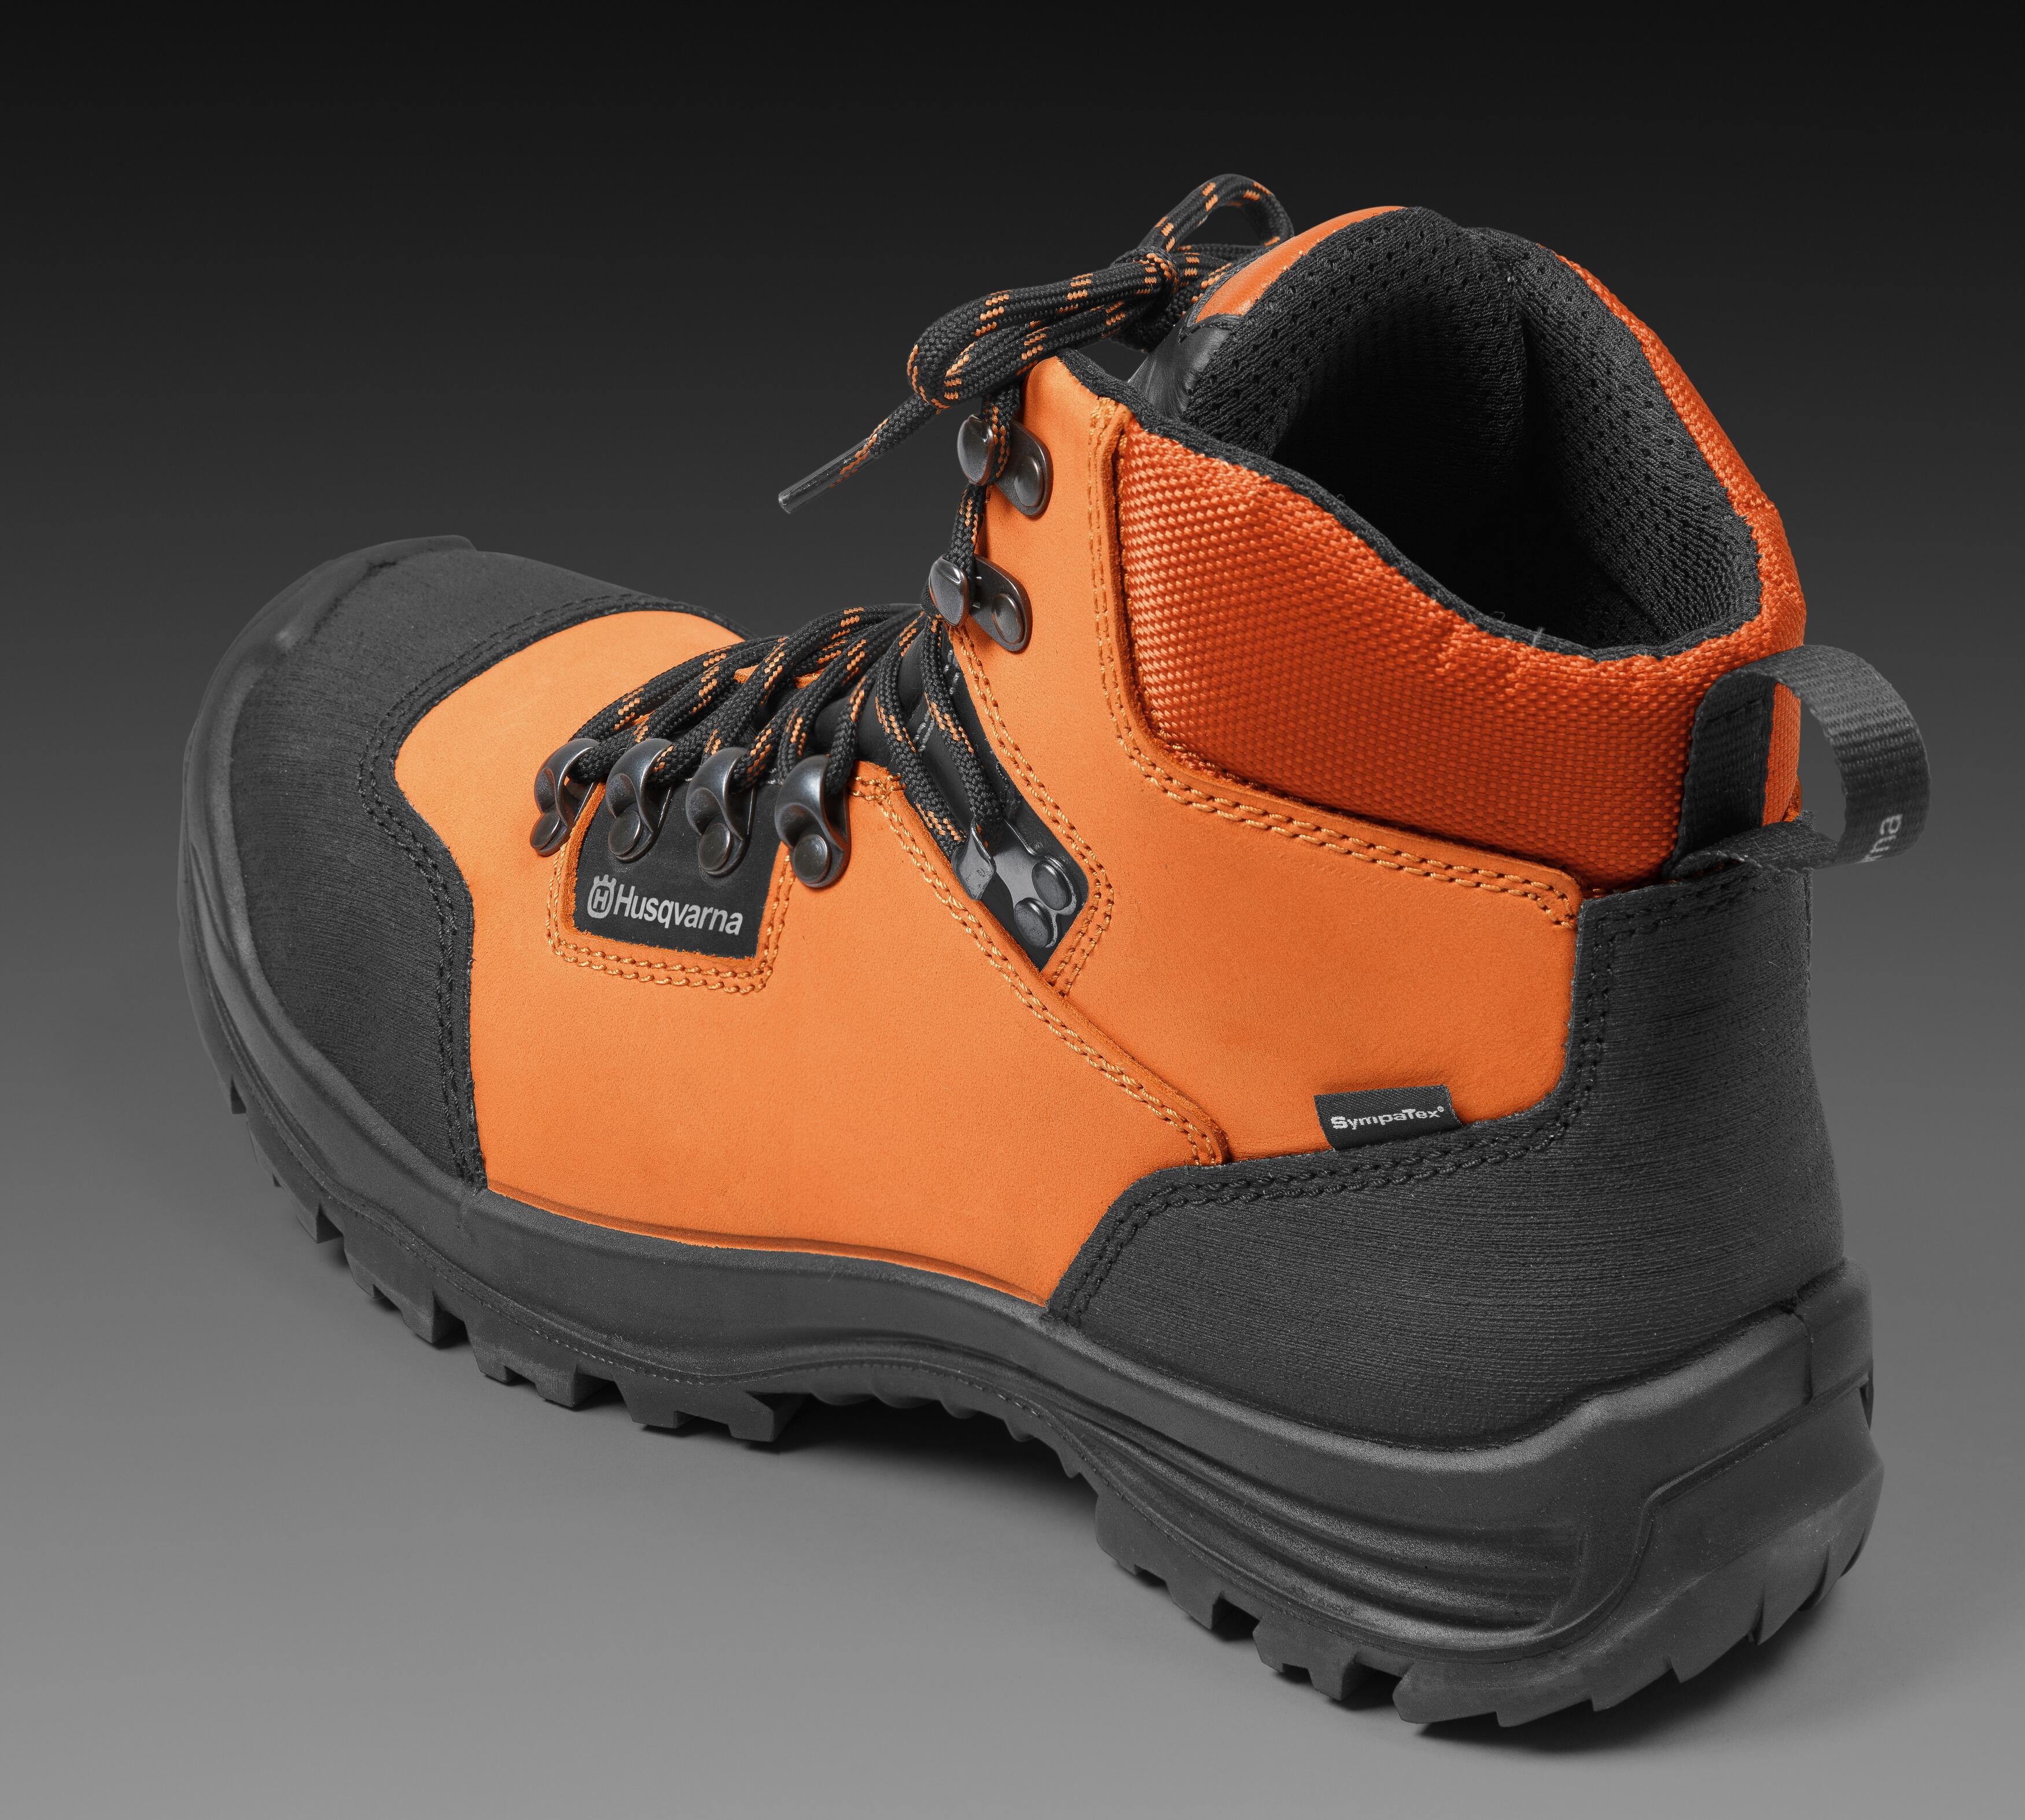 Protective Leather Boots, Technical Light, Reinforcement Front and Heel